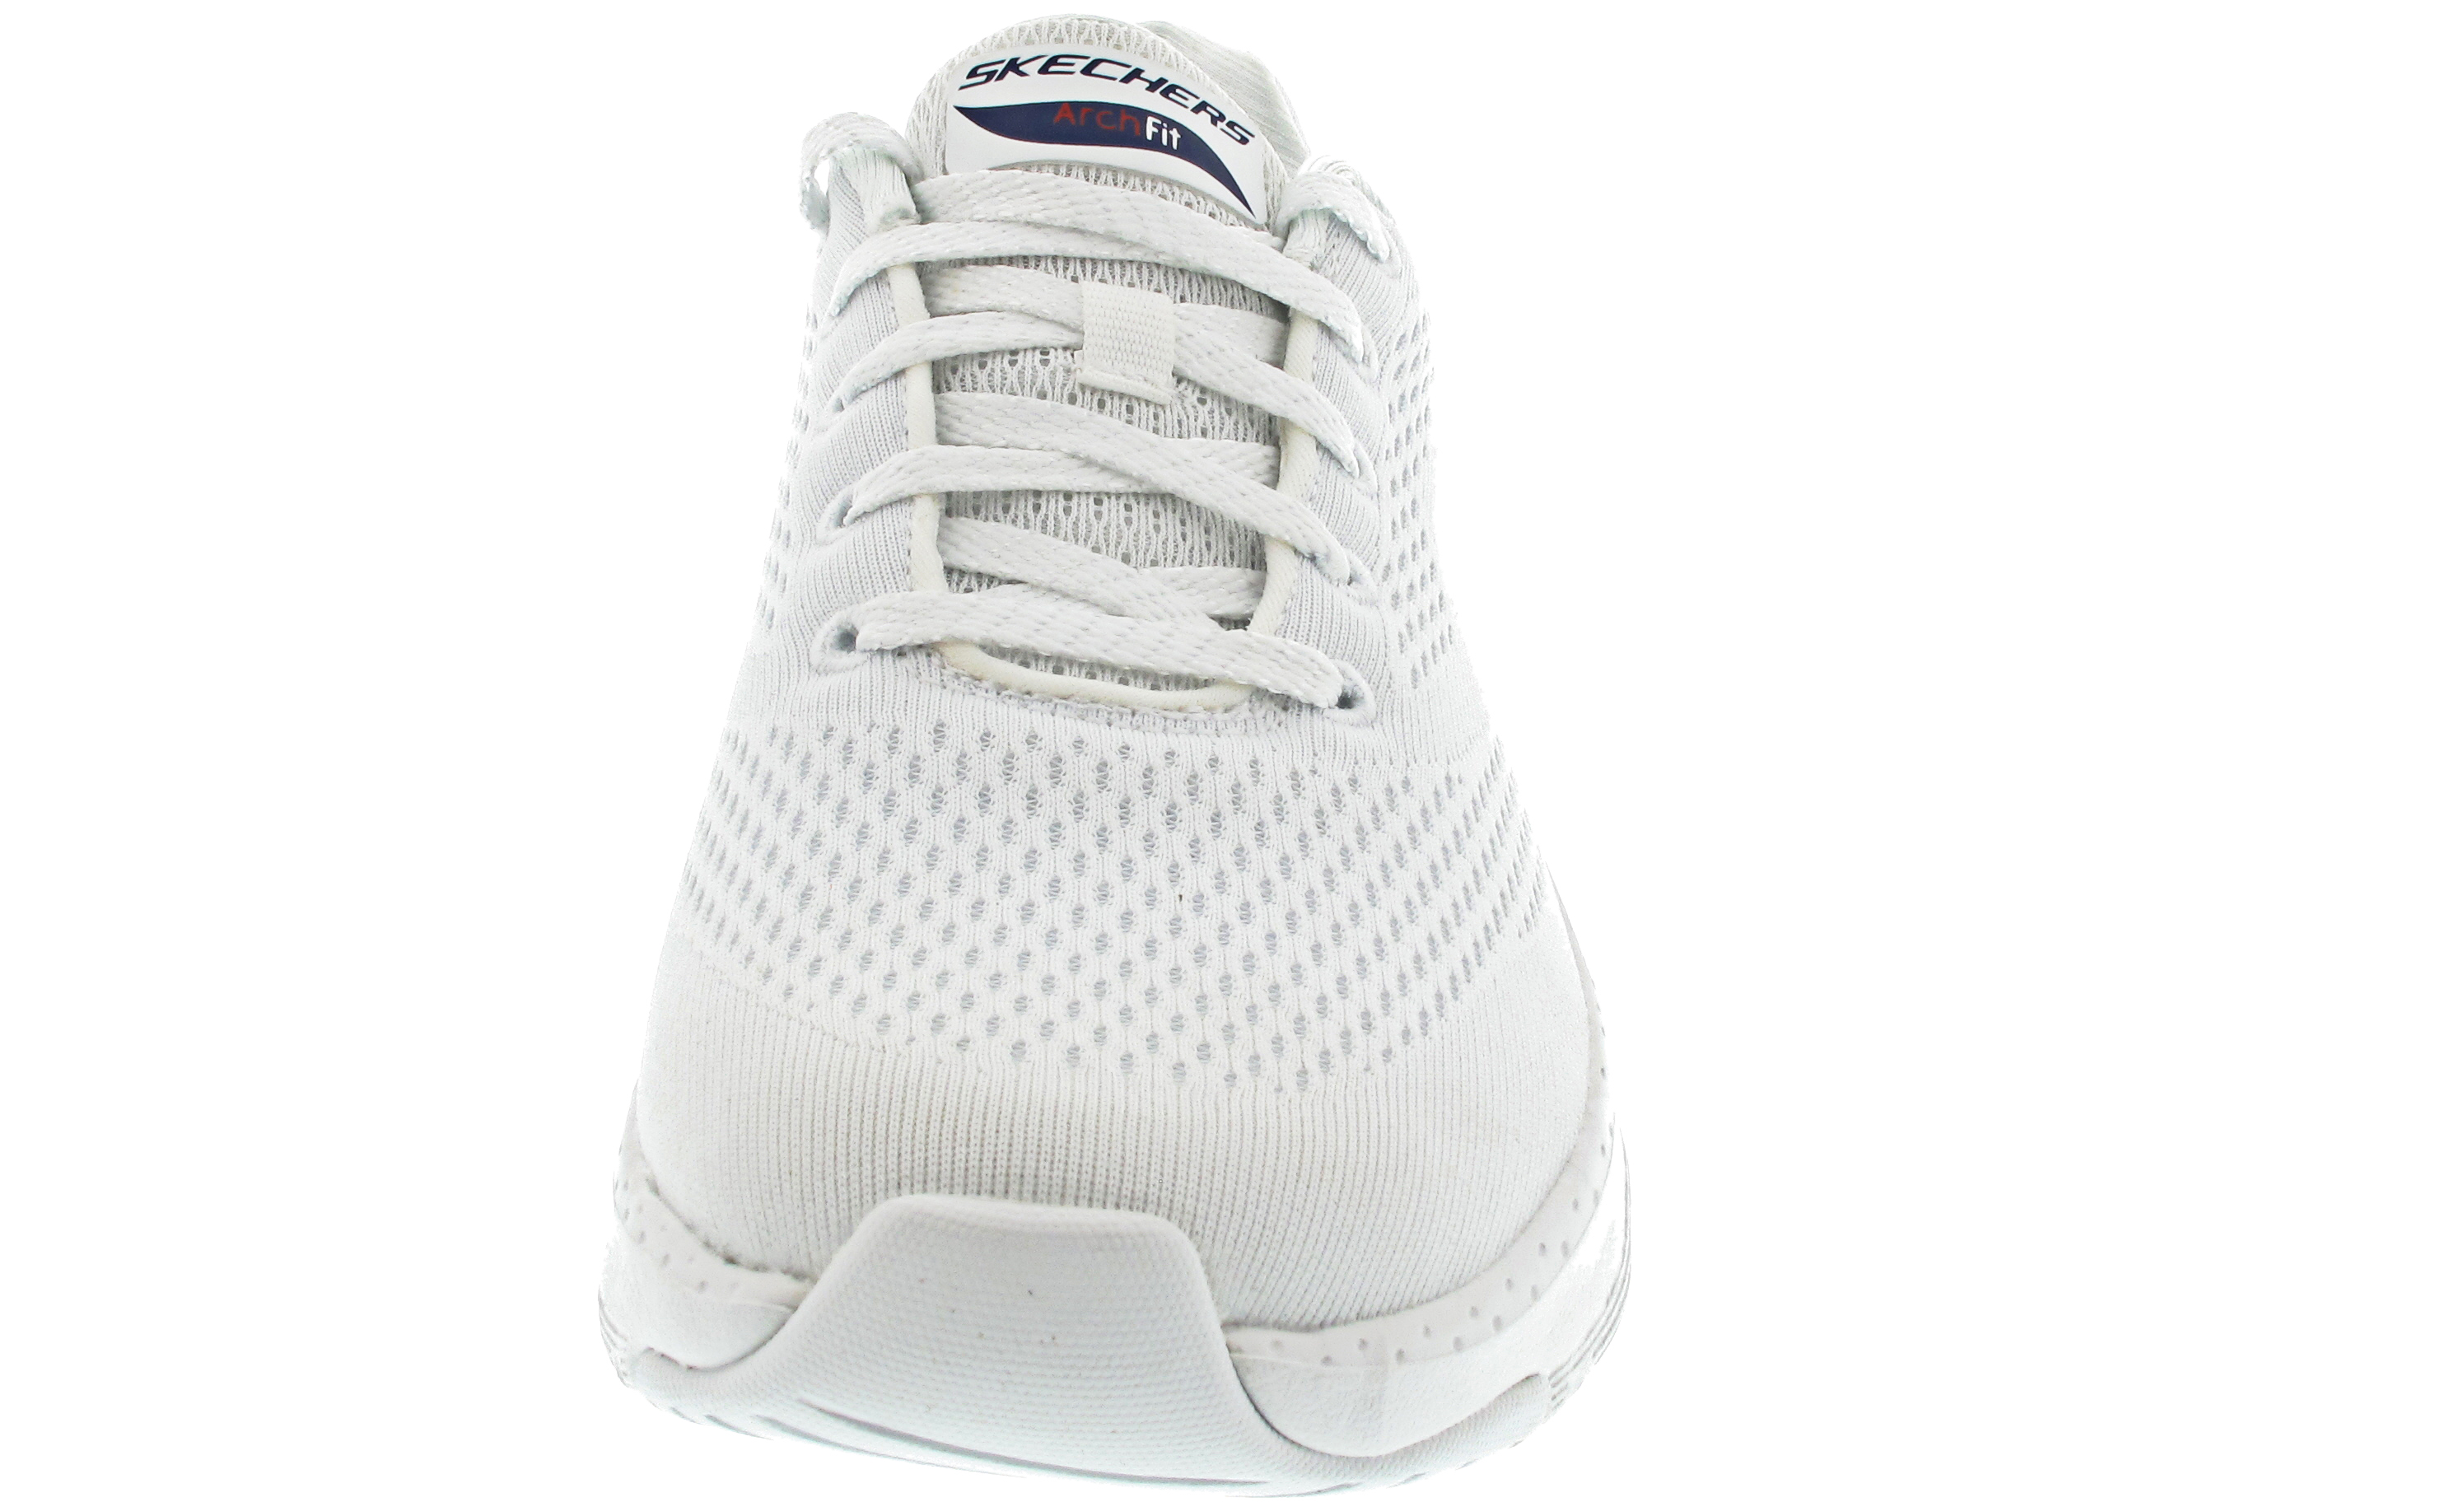 Skechers Arch Fit-Big Appeal